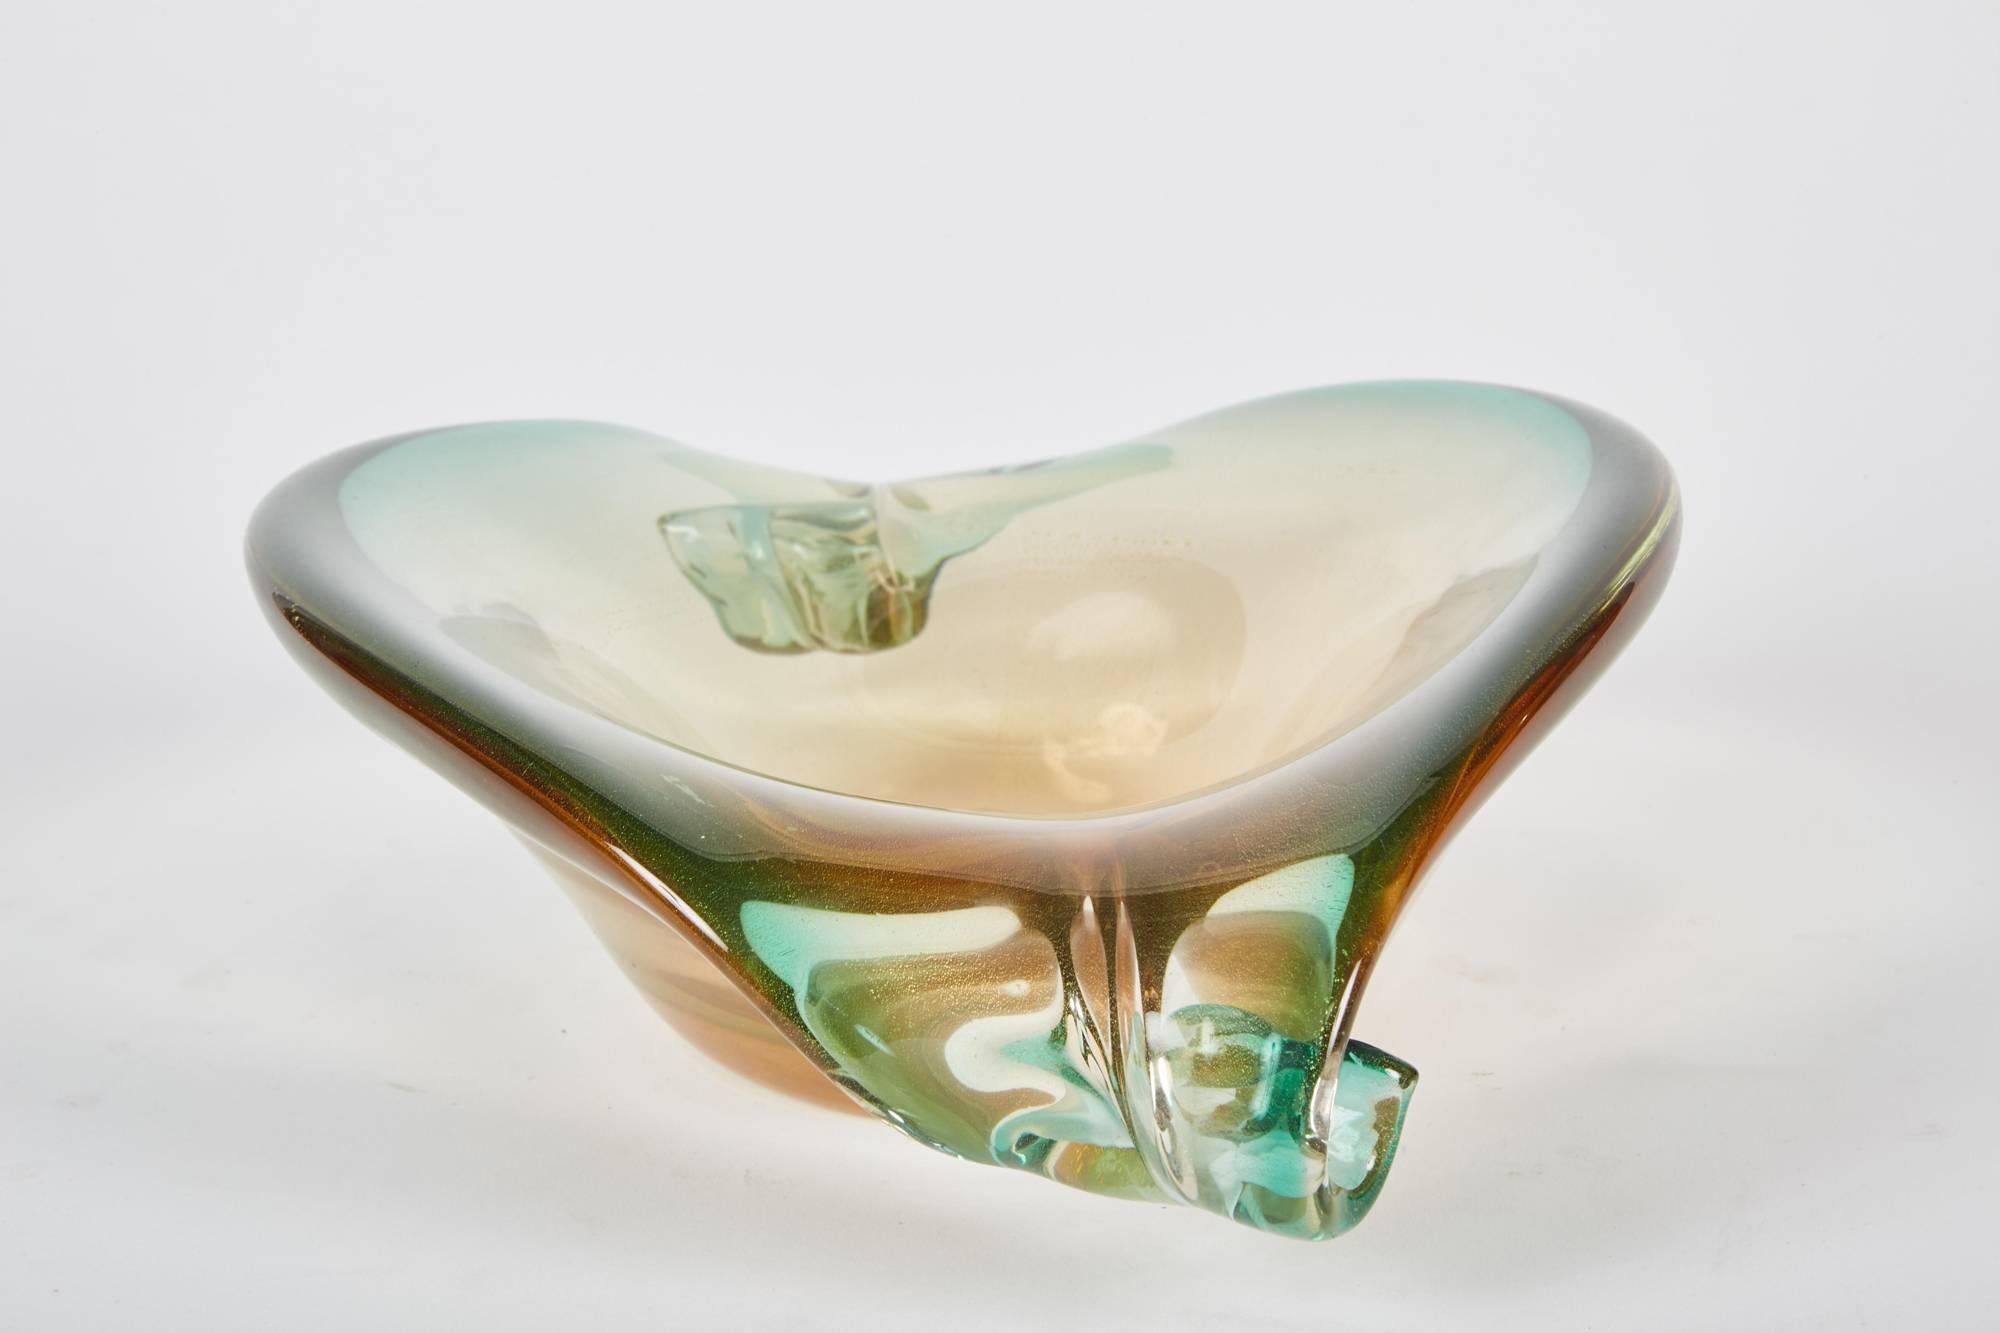 This vintage Murano glass centerpiece has two scrolls on either side of it with a beautiful gradient of green and gold.